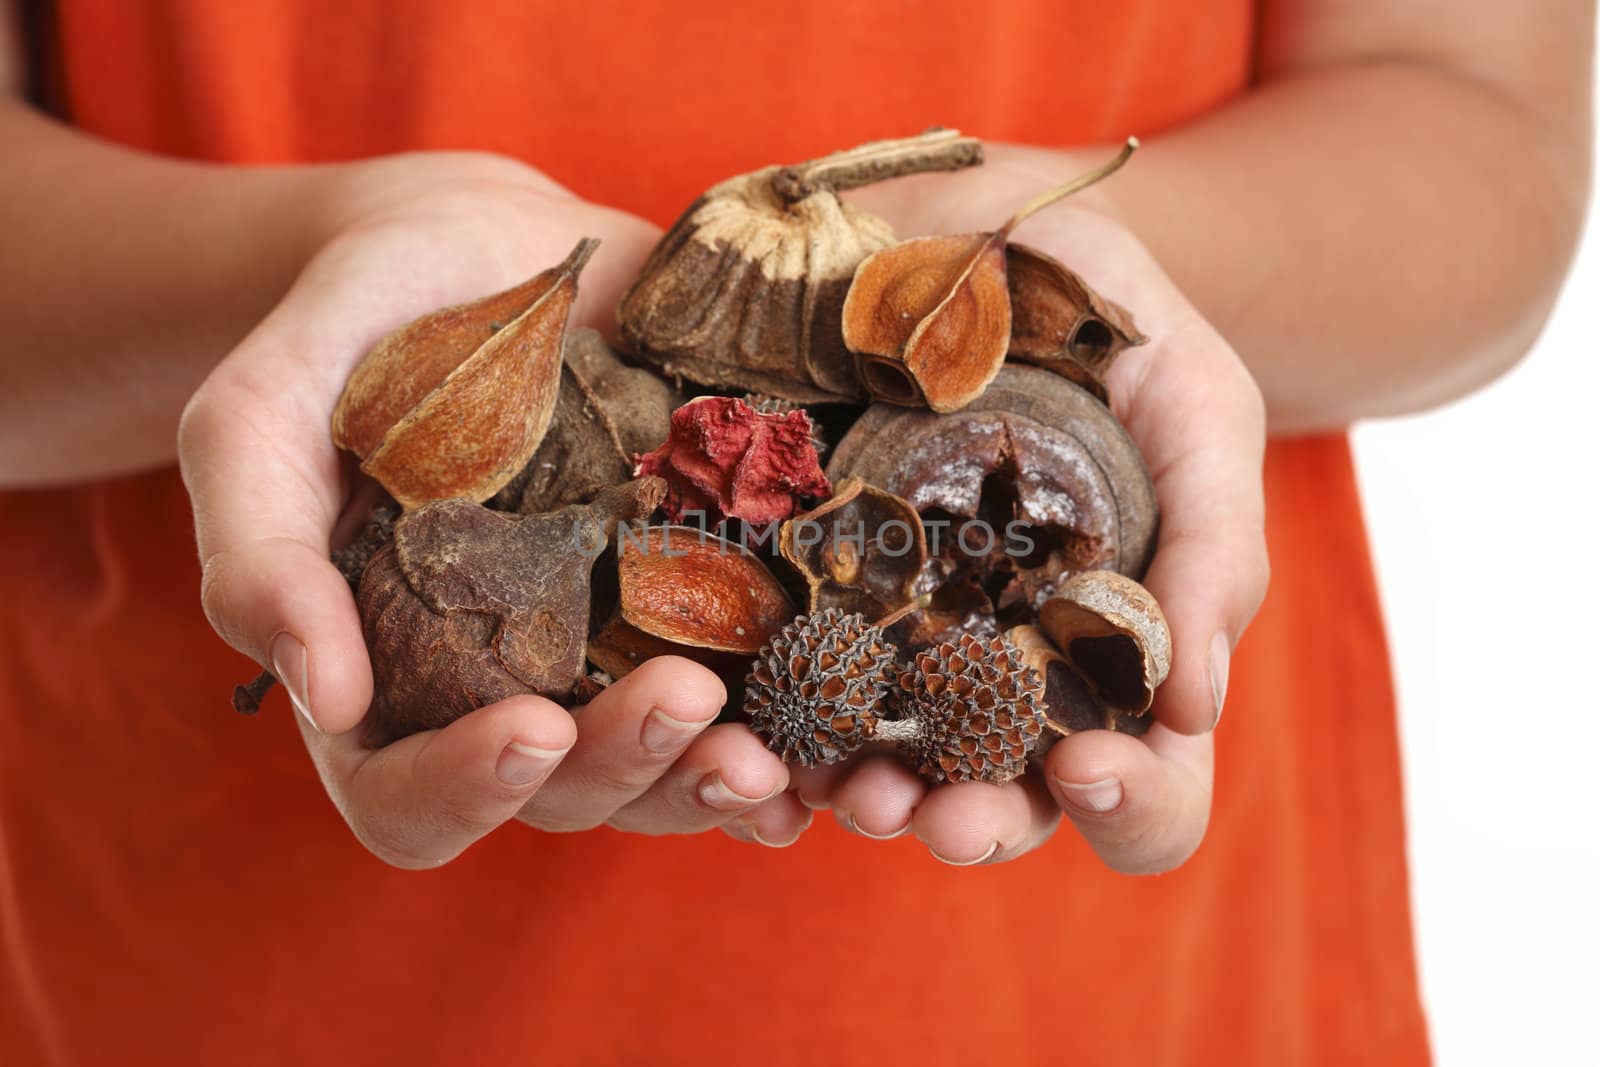 Potpourri is a  scented mixture of dried, naturally fragrant plant materials such as seeds, dried flowers, bark, nuts, leaves and cones.